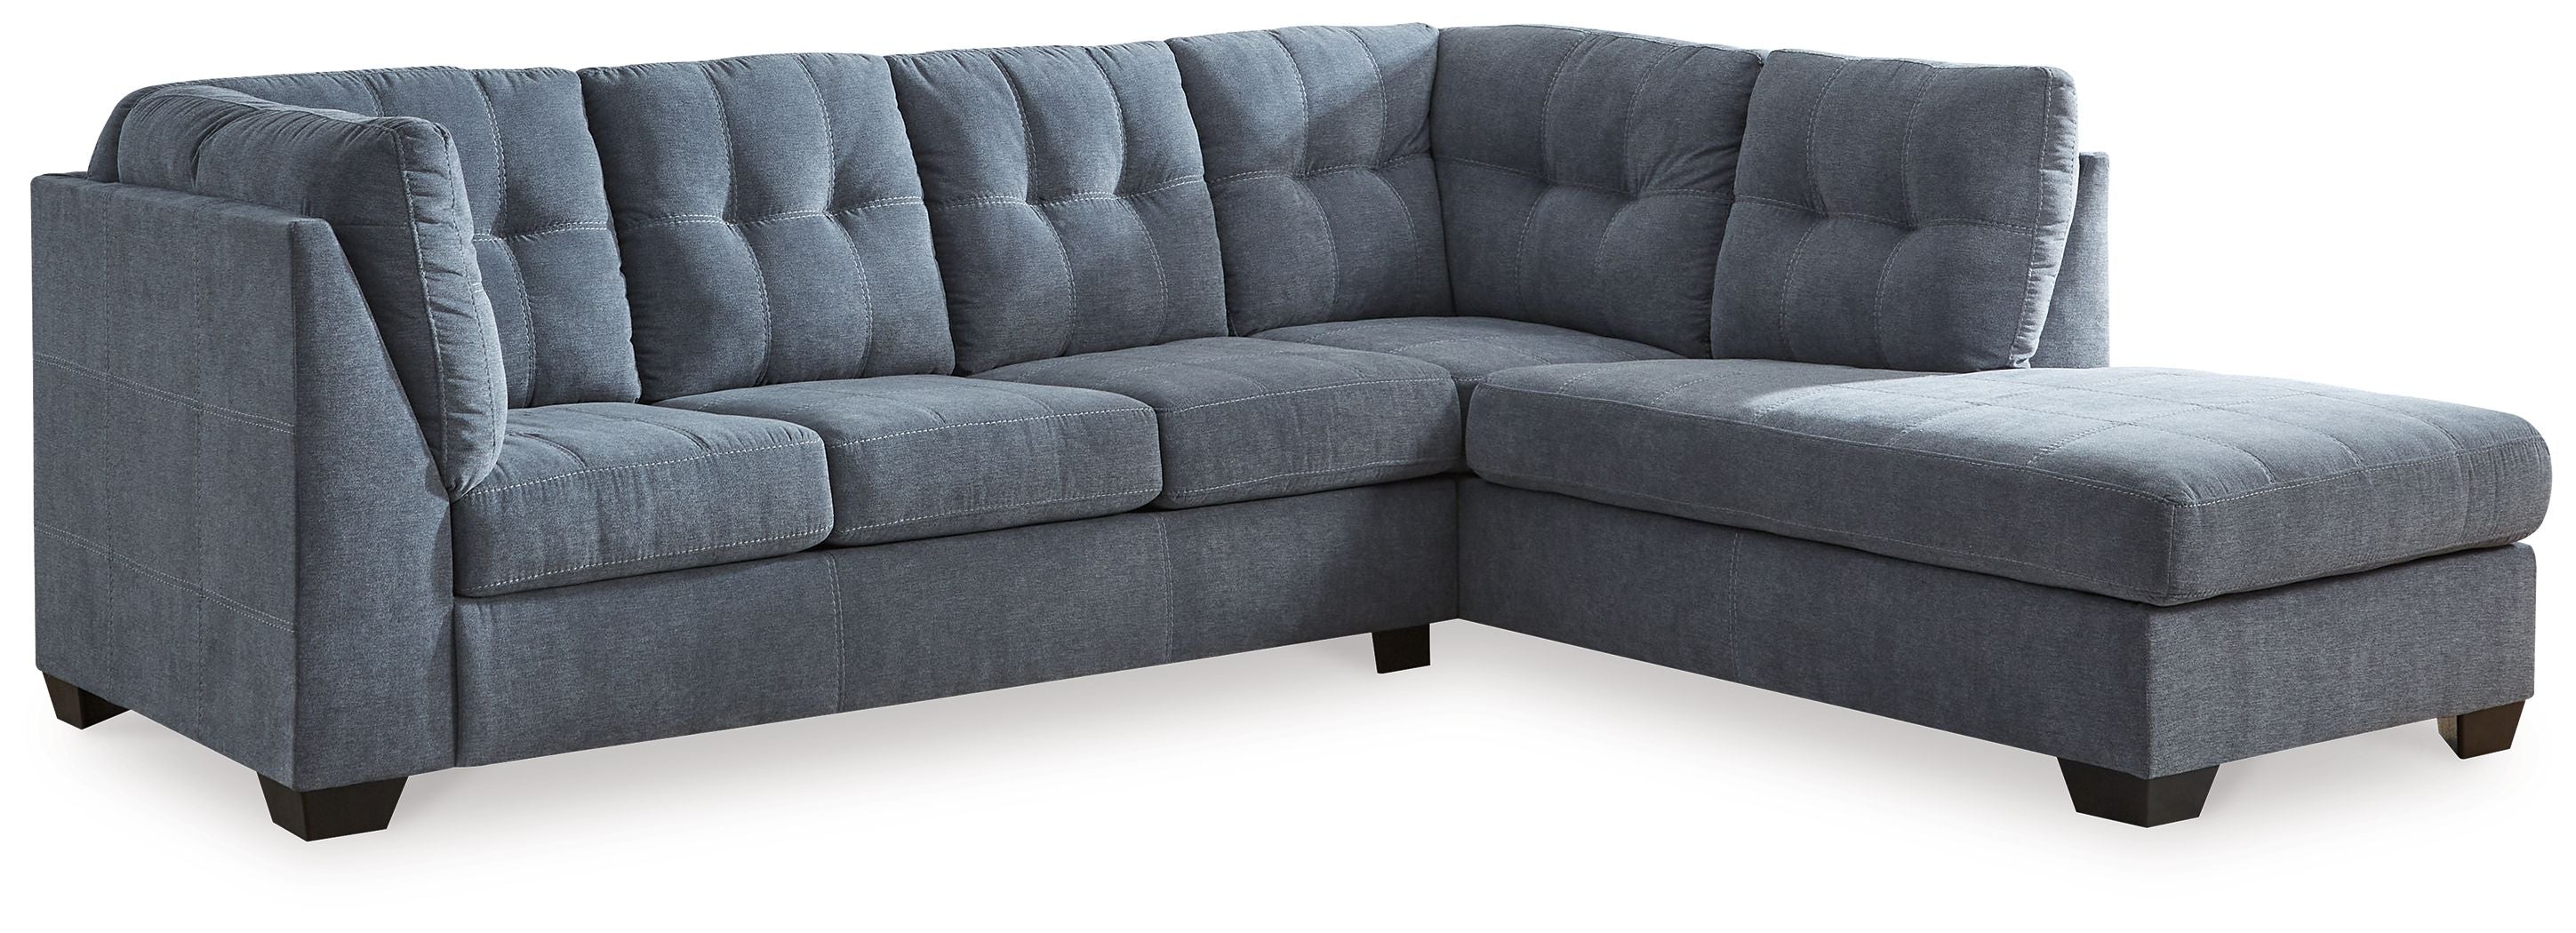 Marleton - Sleeper Sectional-Sleeper Sectionals-American Furniture Outlet